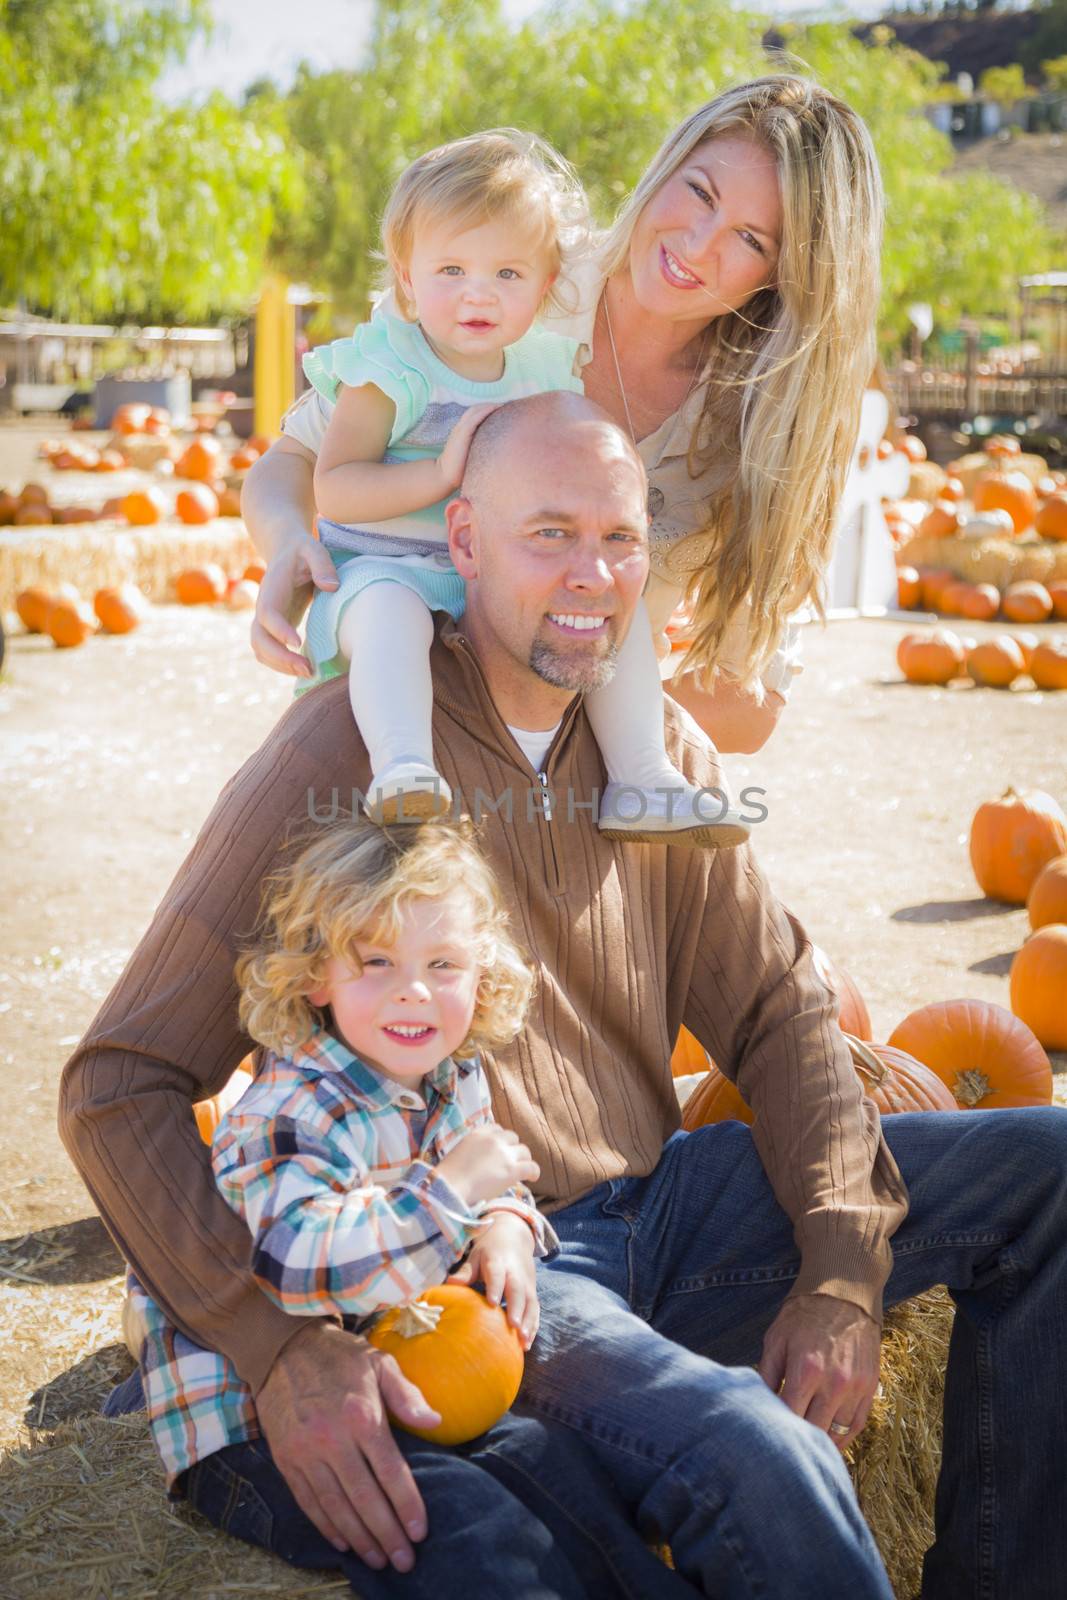 Attractive Family Portrait at the Pumpkin Patch
 by Feverpitched